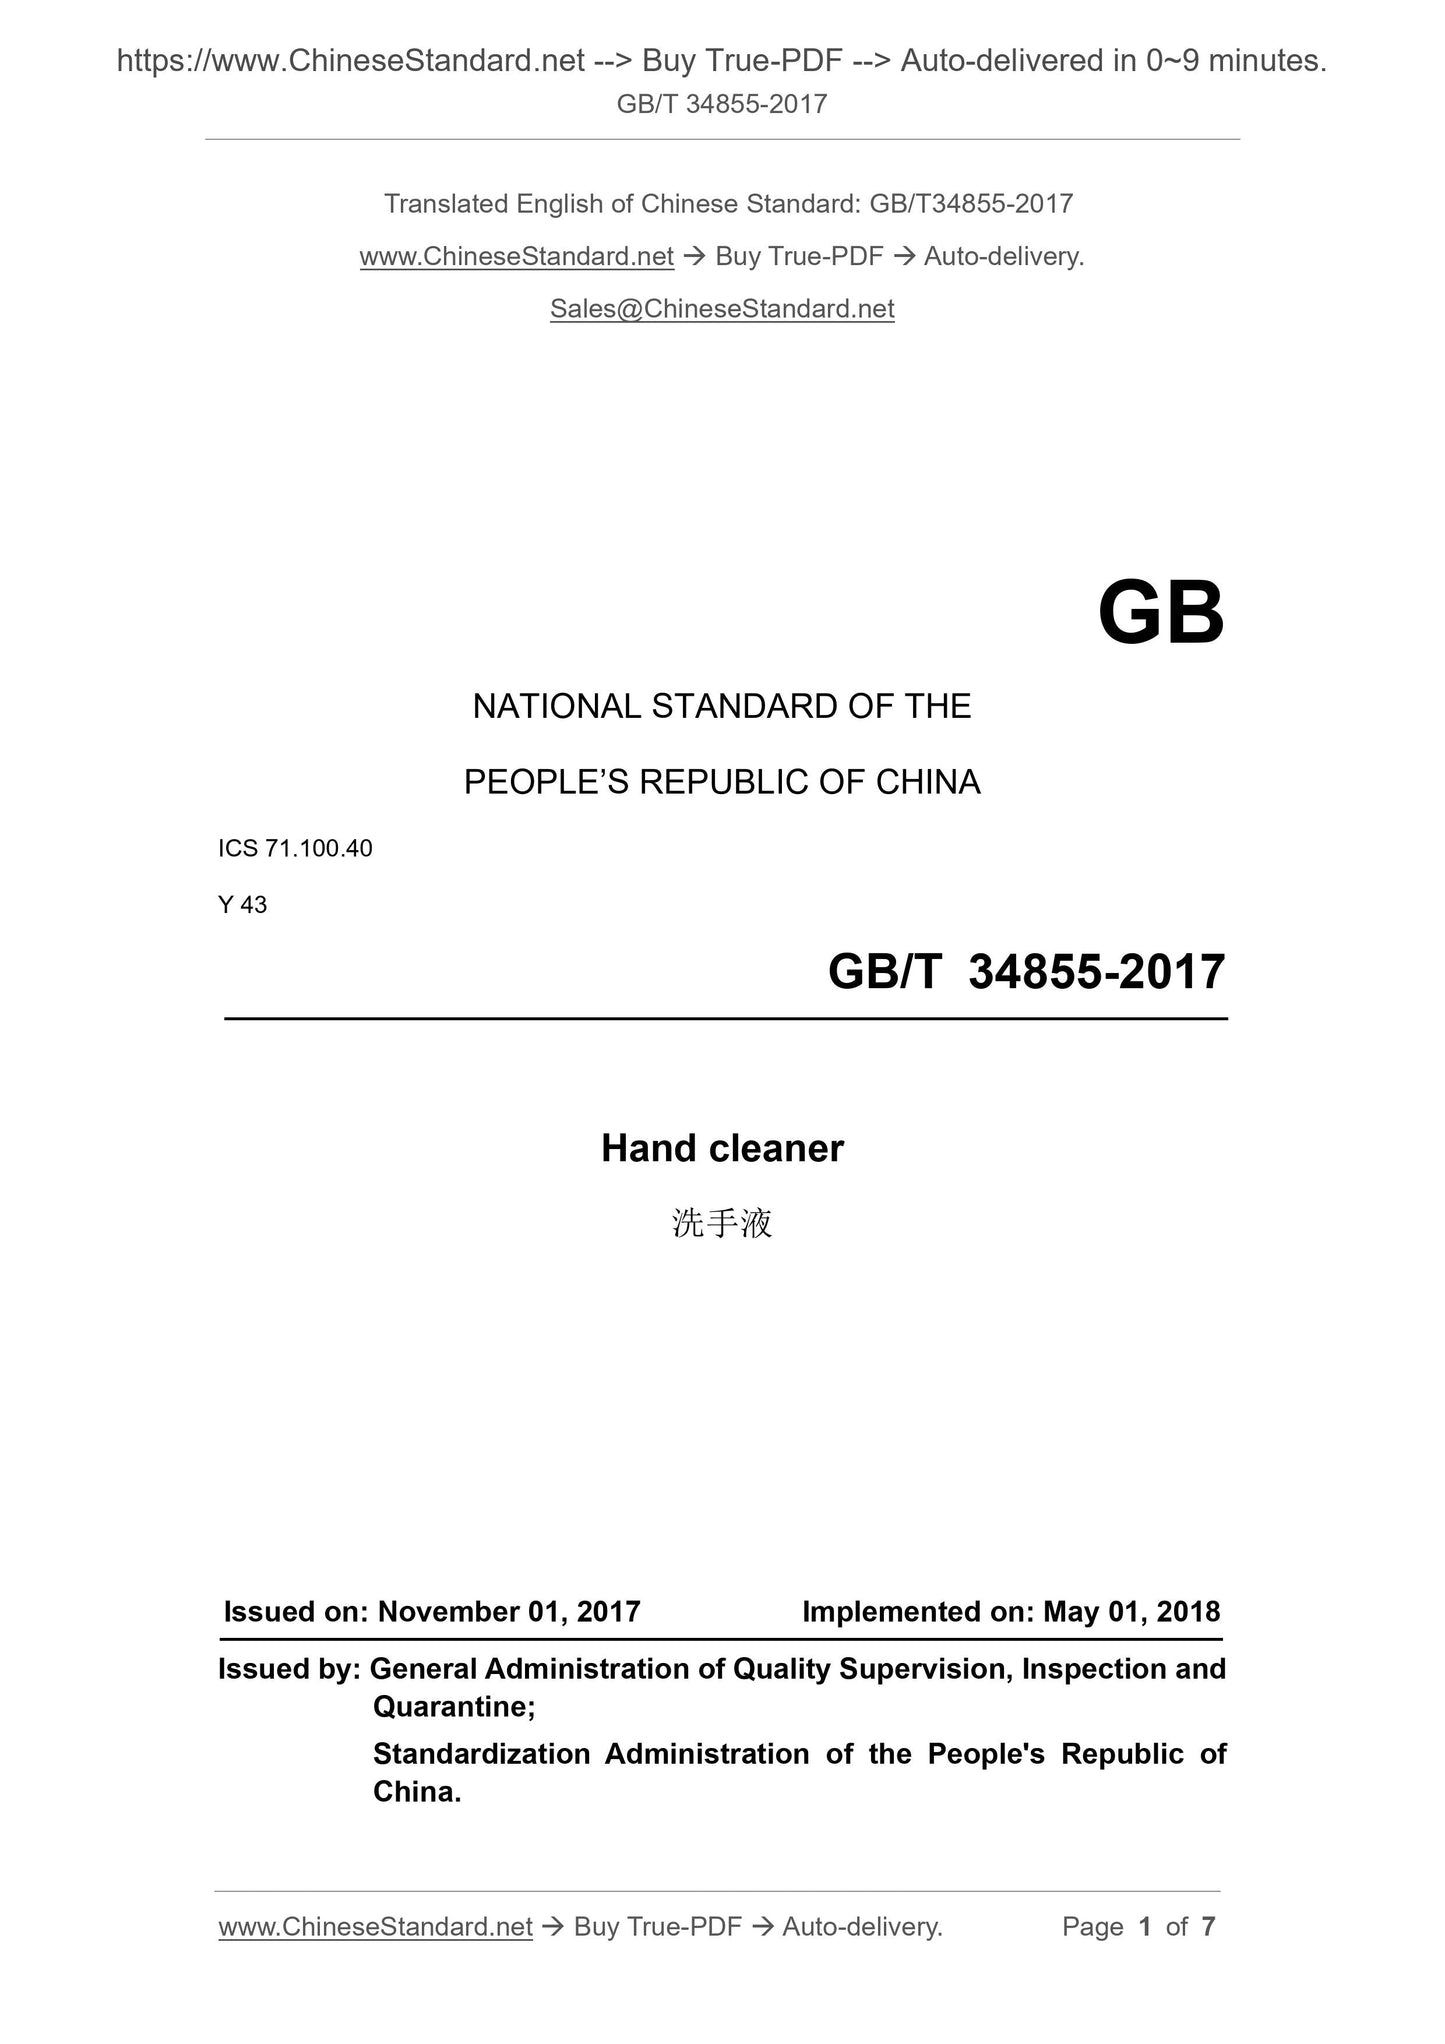 GB/T 34855-2017 Page 1